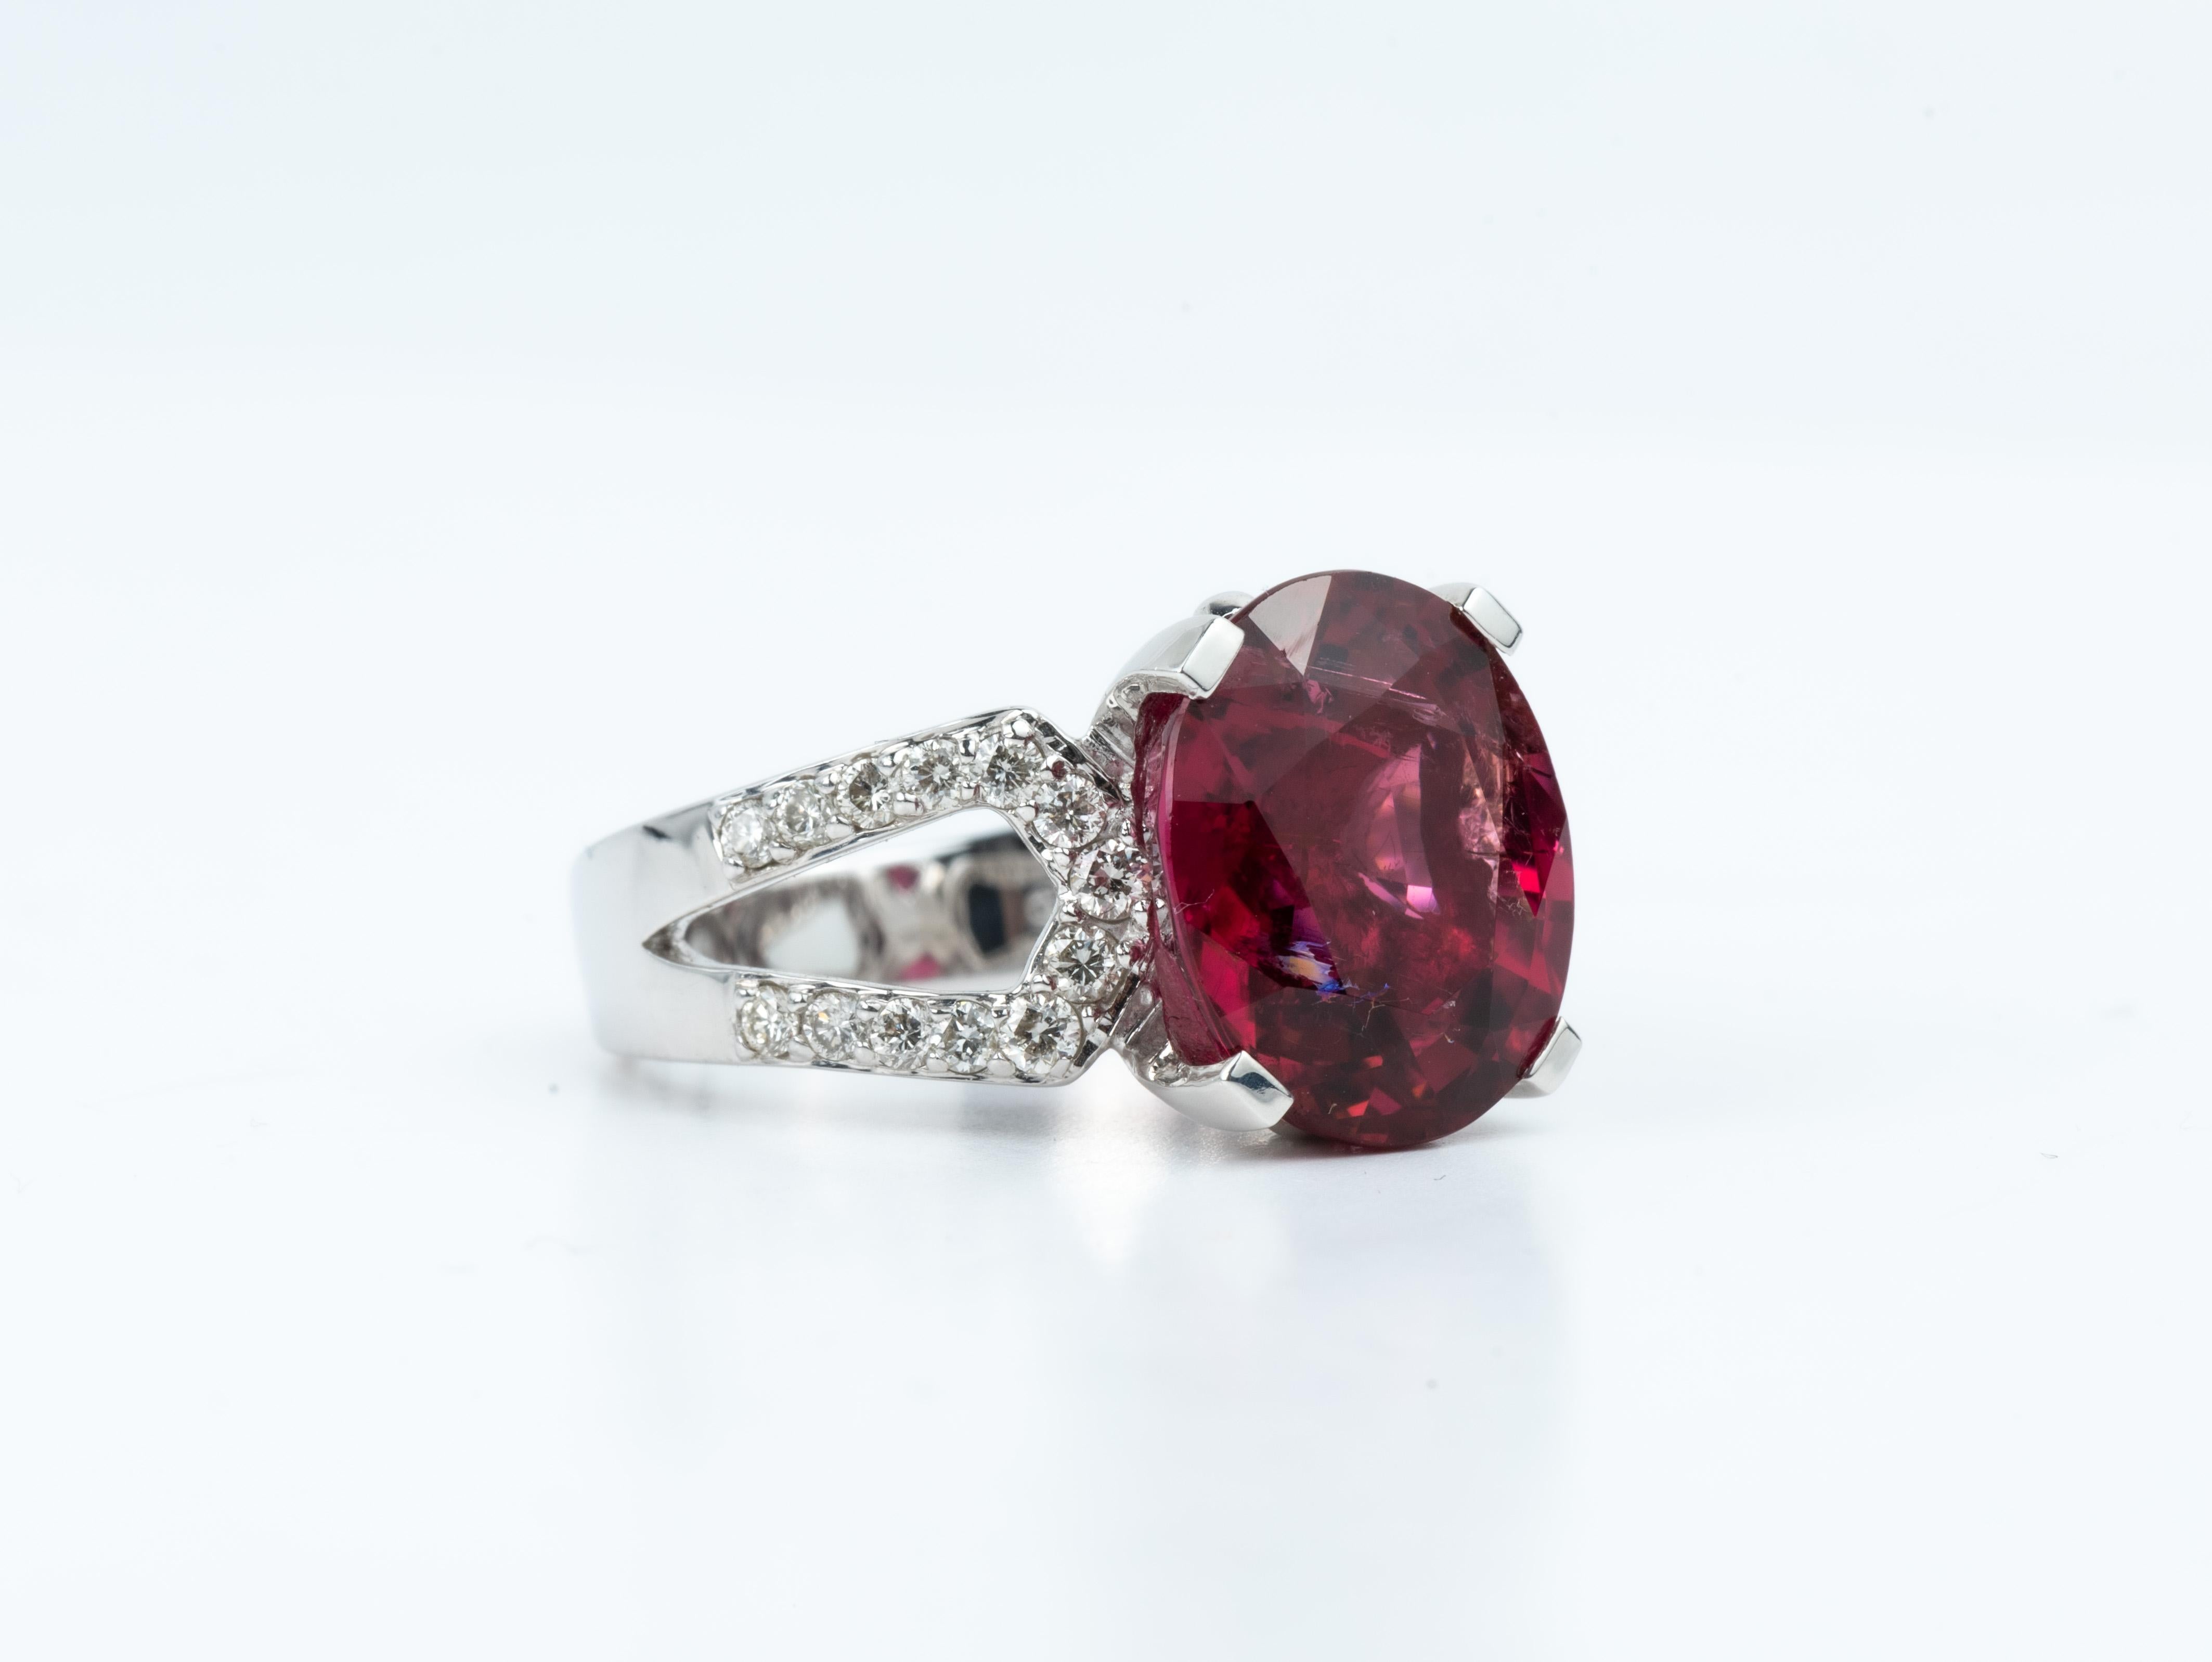 Art Deco 8 Carat Oval Cut Rubellite Tourmaline with 1 Ct Diamonds Cocktail Ring 18k White For Sale